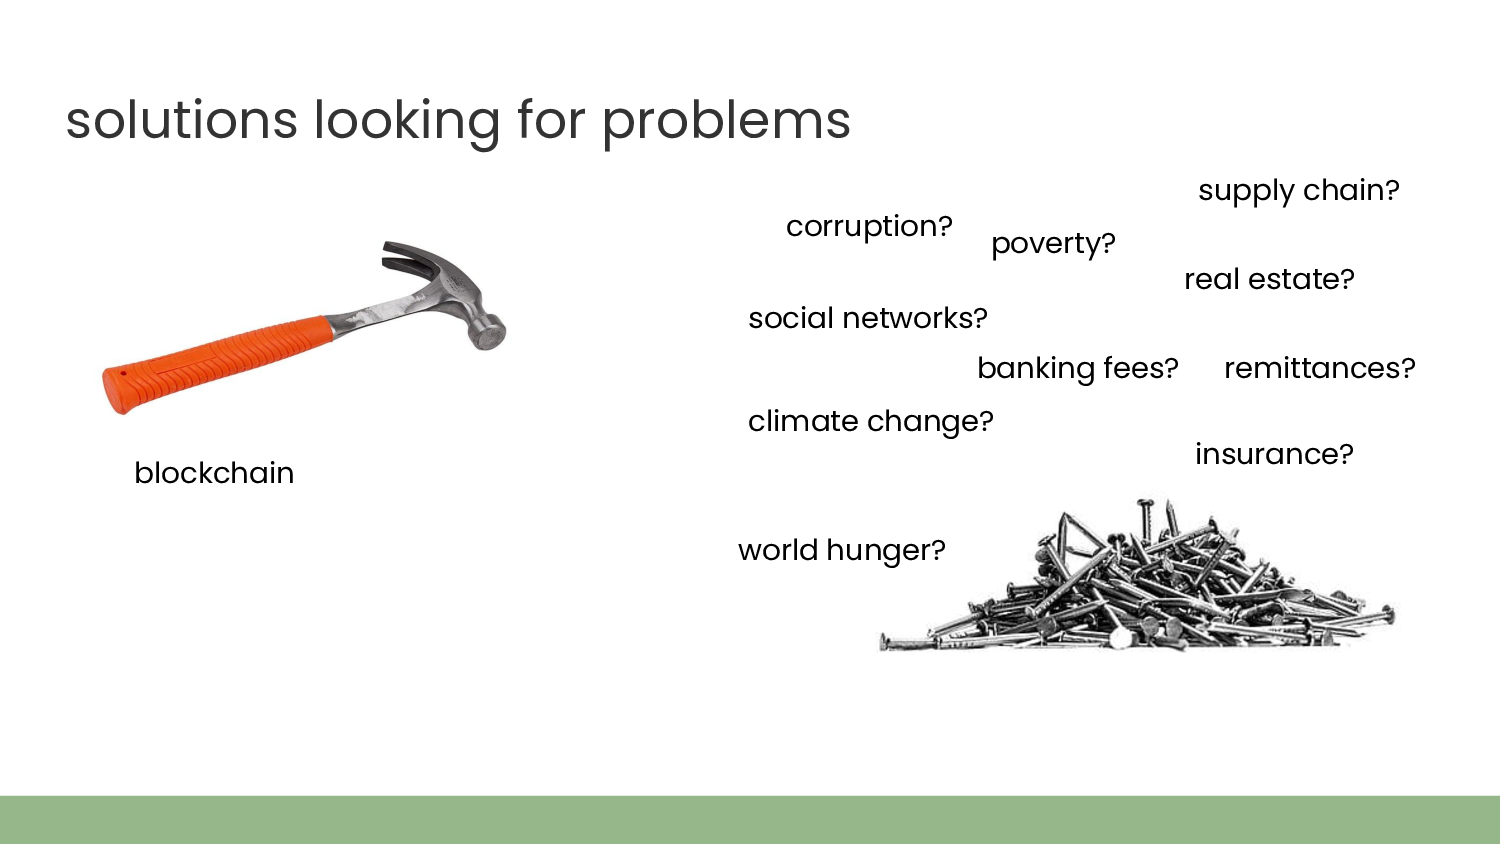 Title: solutions looking for problems. Photo of a hammer, captioned 'blockchain'. Photo of a pile of nails, with words surrounding it: 'corruption? poverty? supply chain? social networks? banking fees? real estate? remittances? climate change? insurance? world hunger?